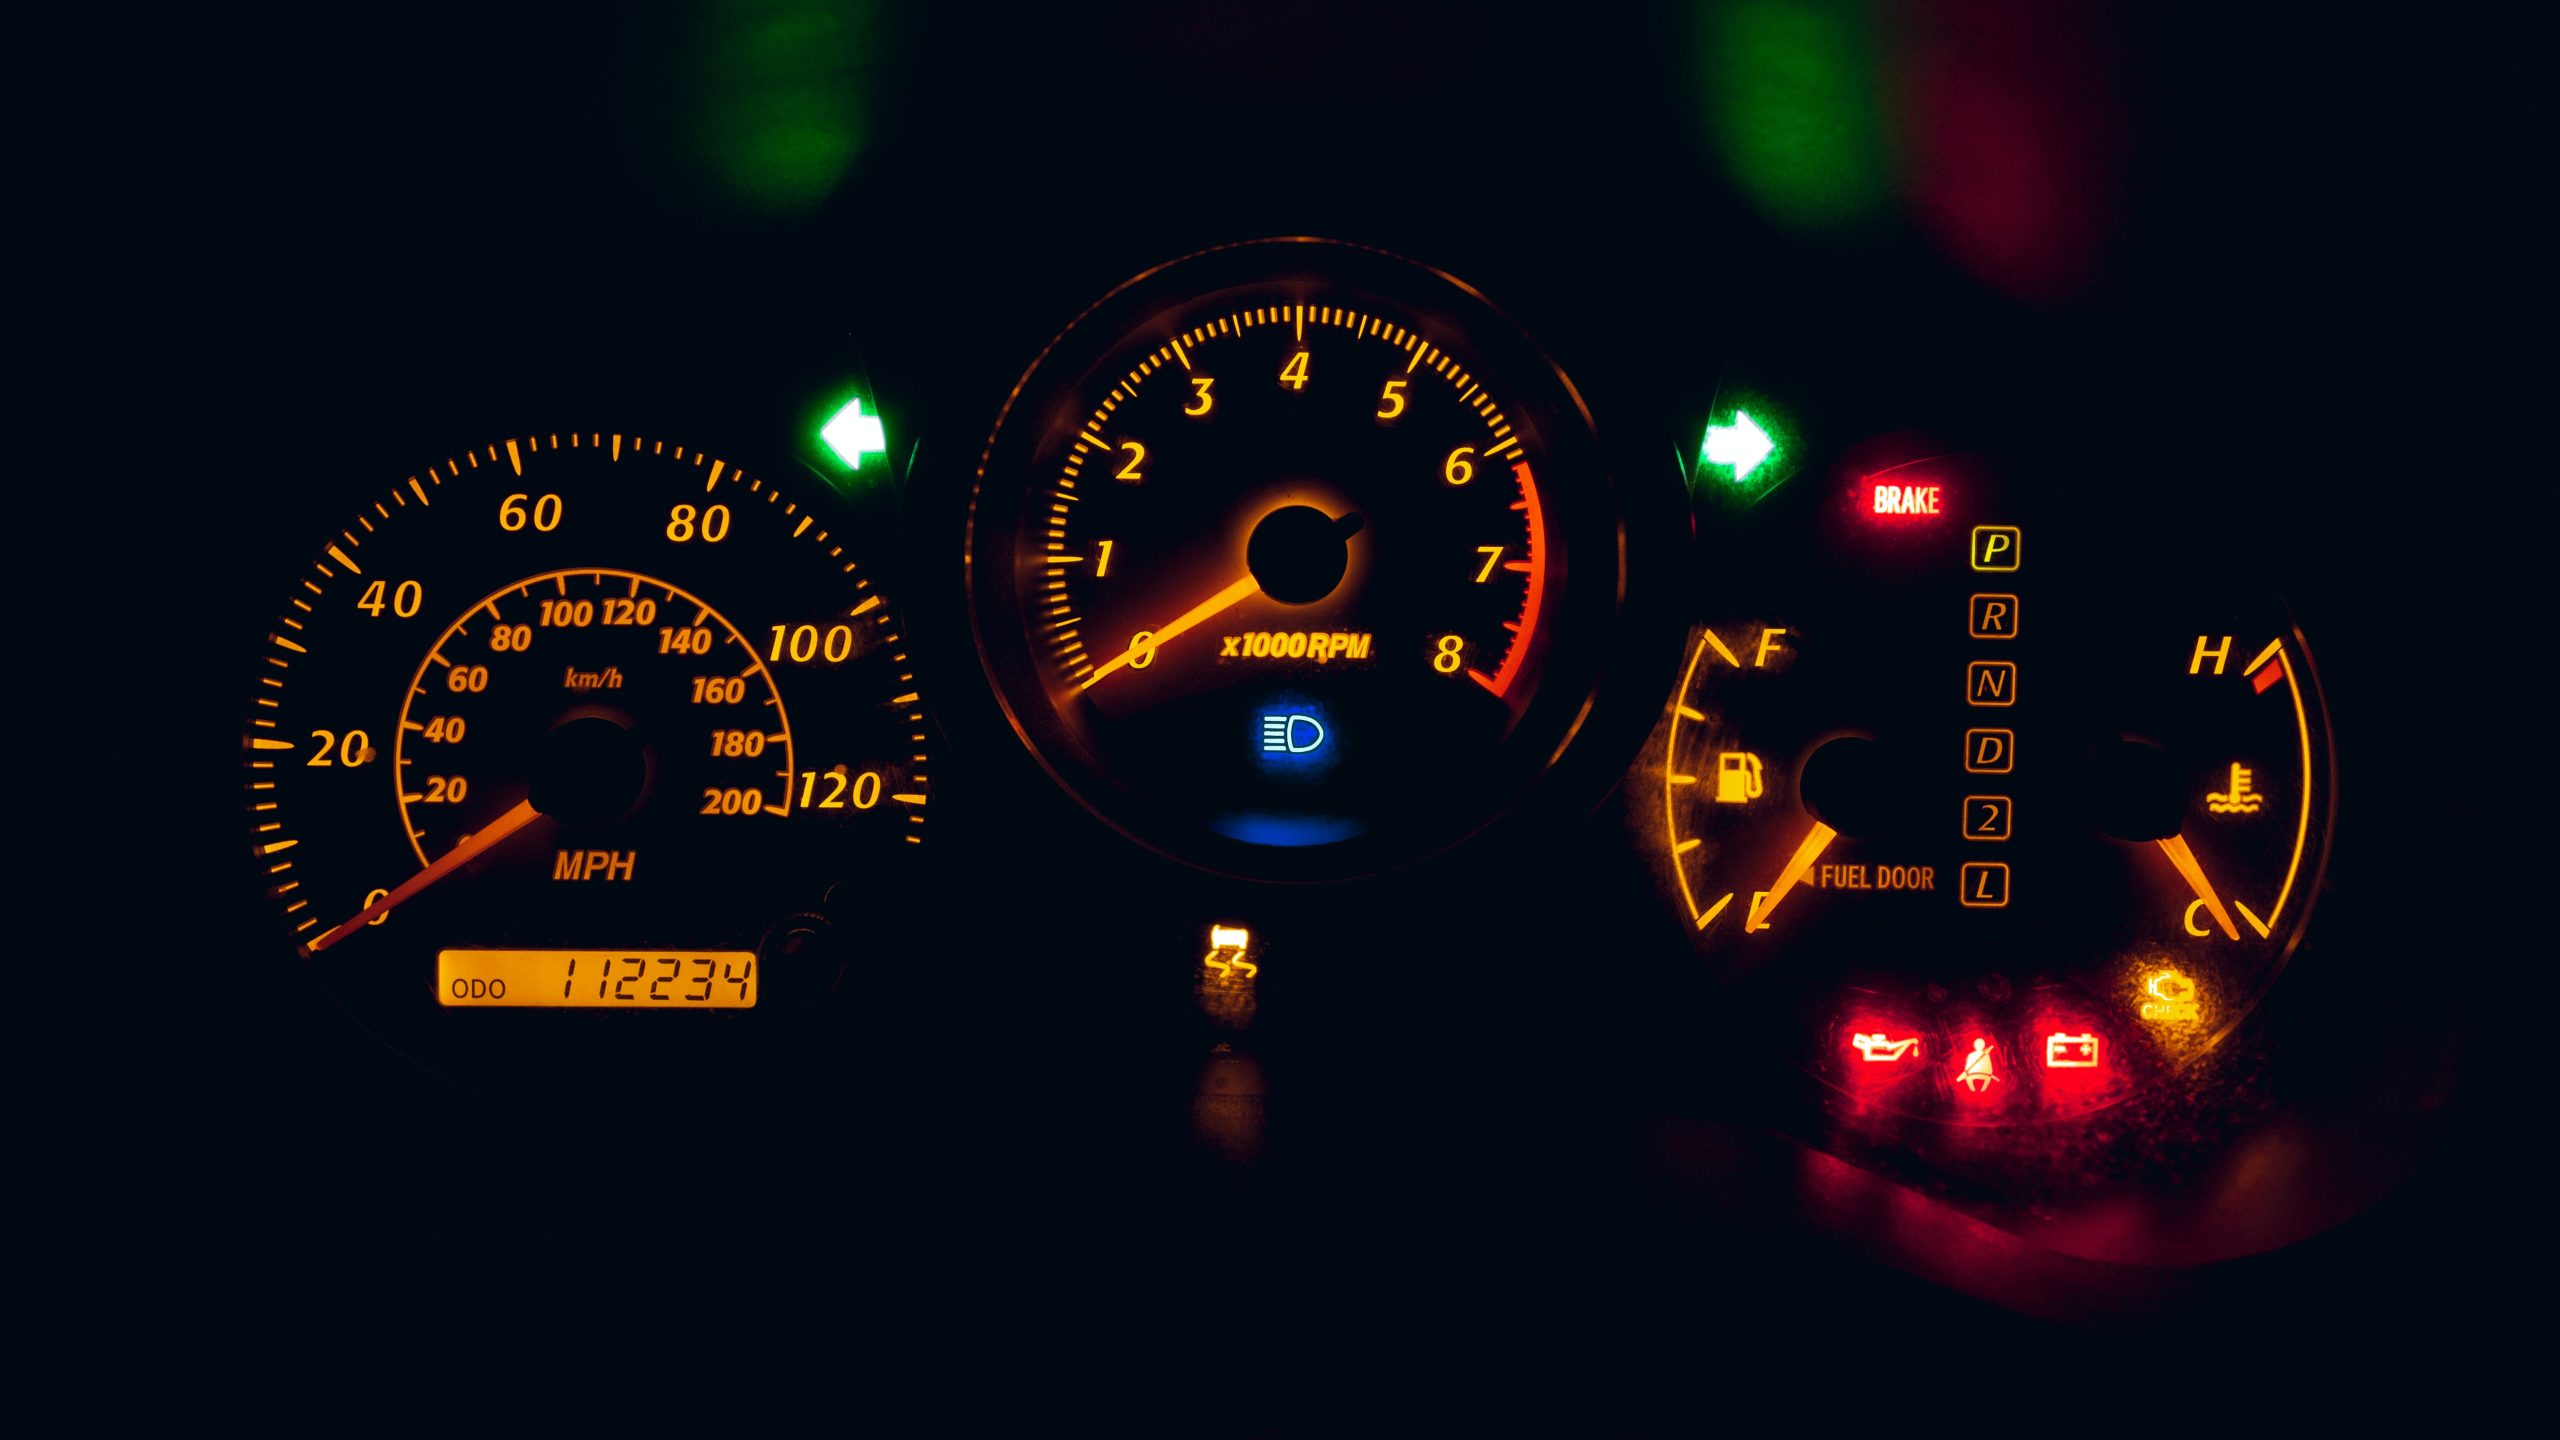 Here’s your quick and easy guide to Gauge Cluster Icons and what they mean